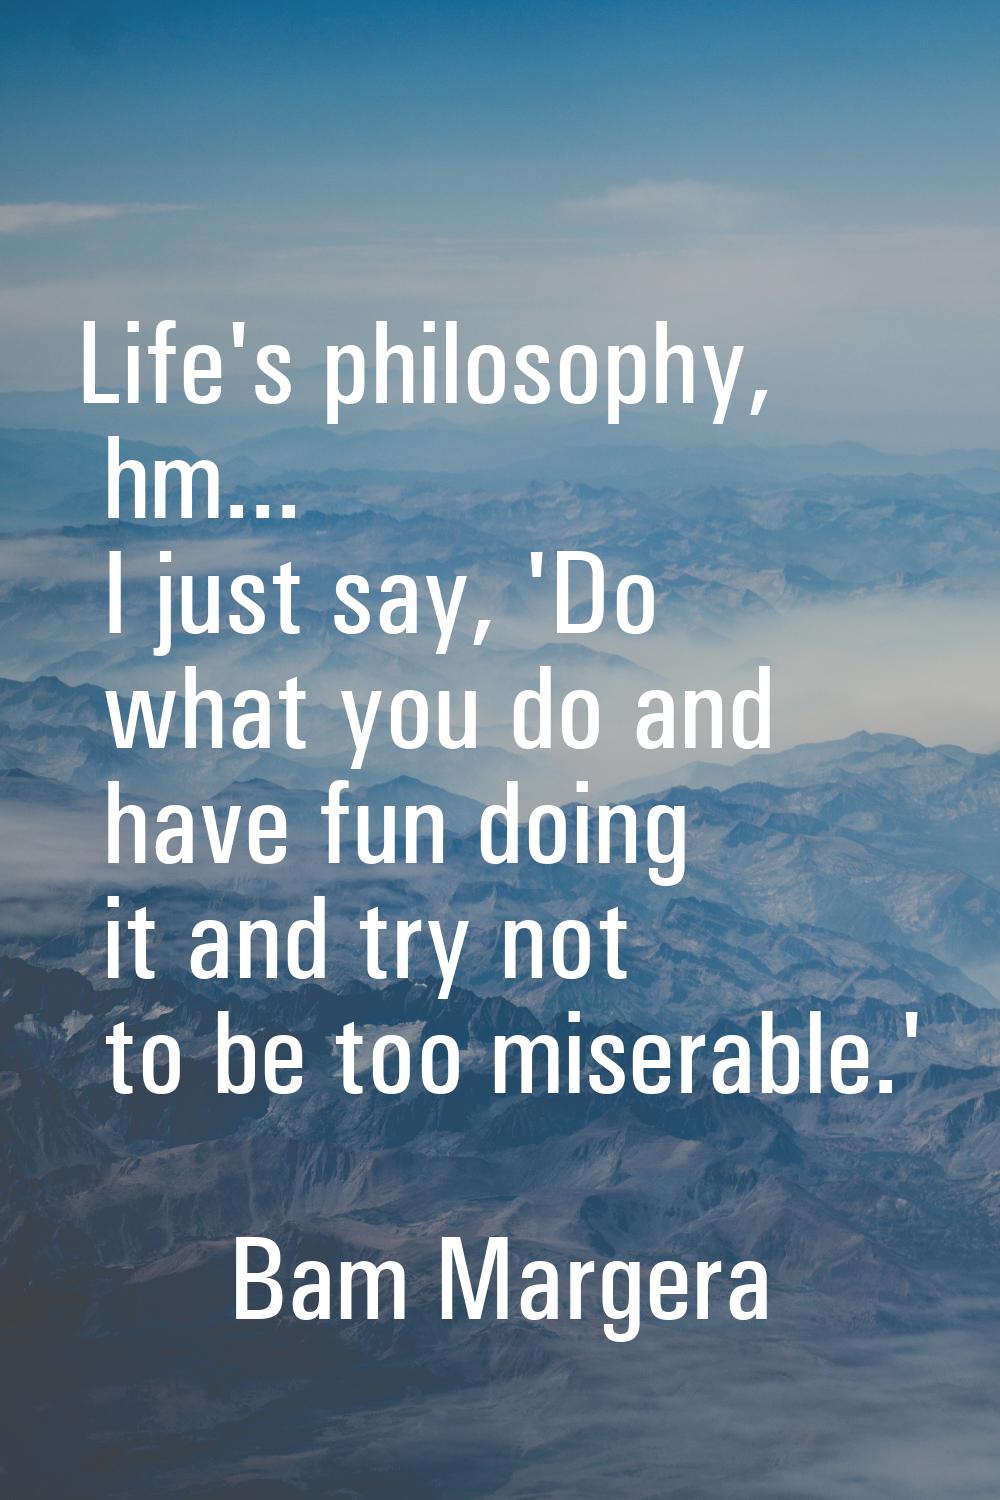 Life's philosophy, hm... I just say, 'Do what you do and have fun doing it and try not to be too mi